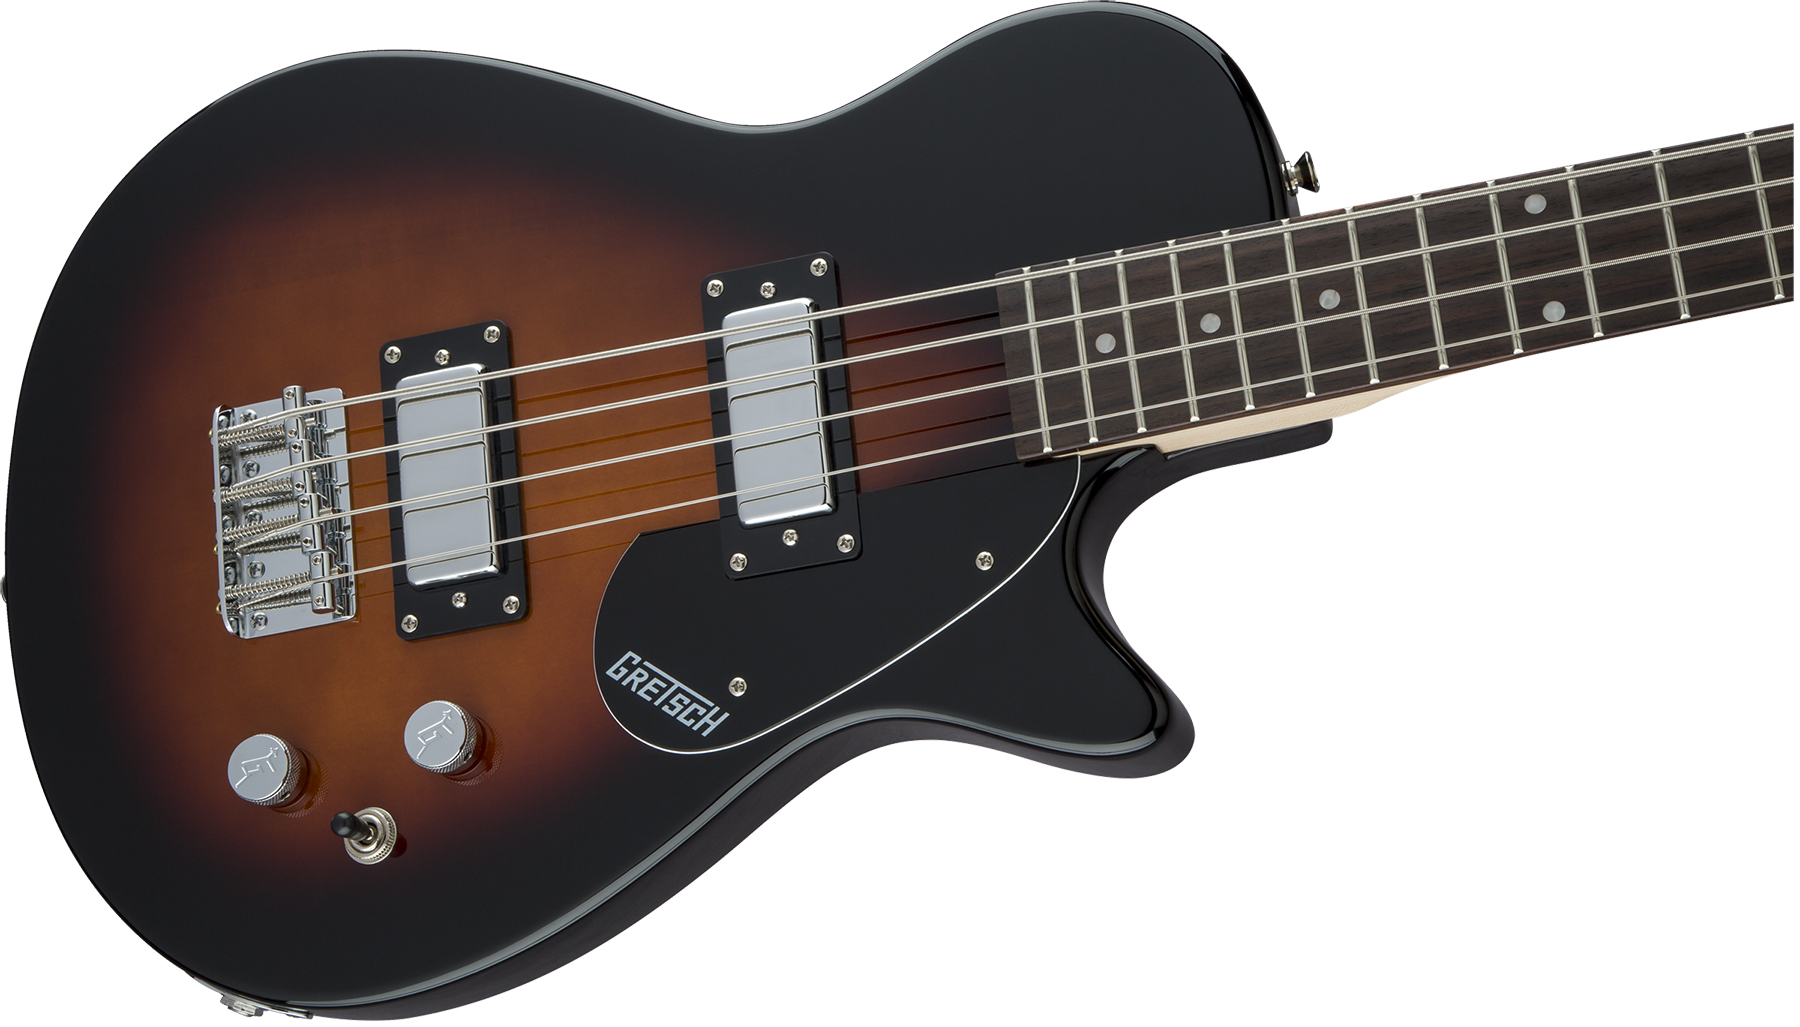 Gretsch G2220 Electromatic Junior Jet Bass Ii Short-scale 2019 Hh Wal - Tobacco Sunburst - Electric bass for kids - Variation 2